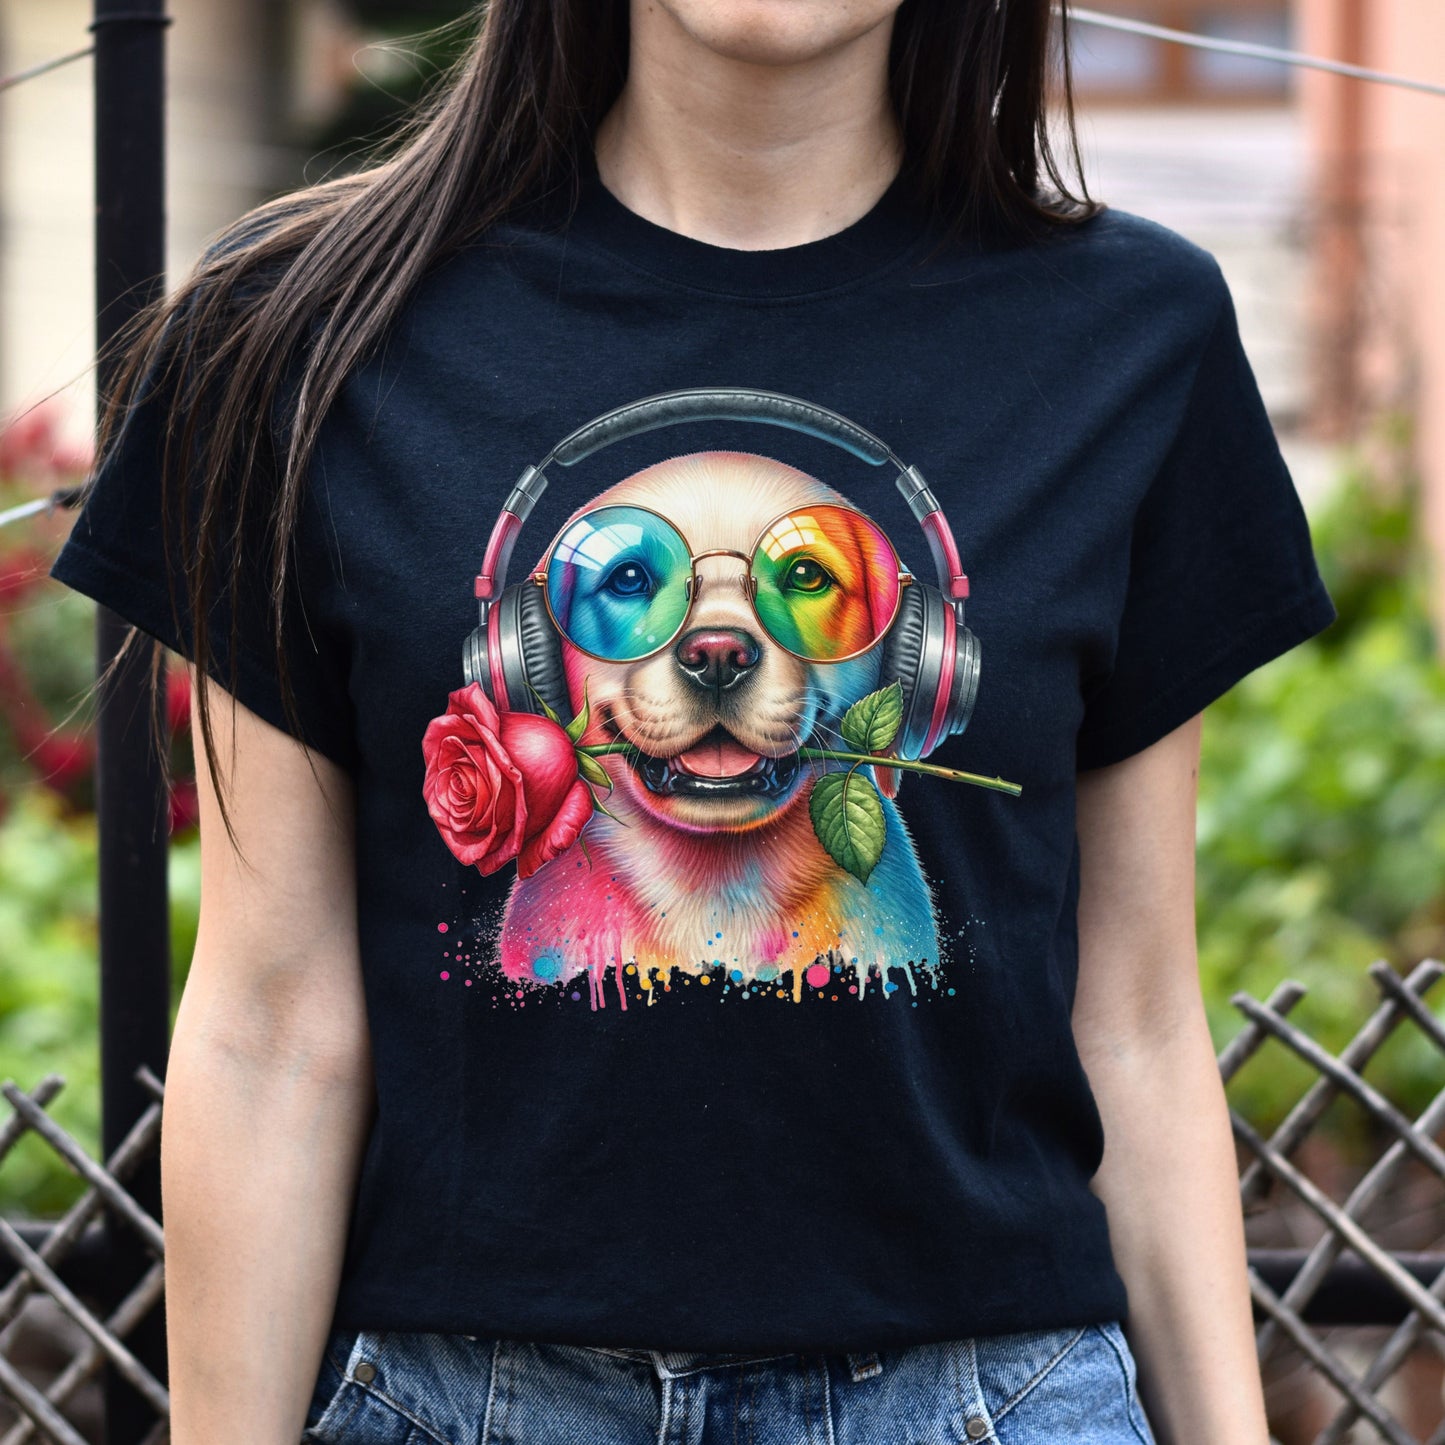 Labrador with Rose Colorful Unisex T-Shirt Cool romantic dog tee Black Navy Dark Heather-Black-Family-Gift-Planet